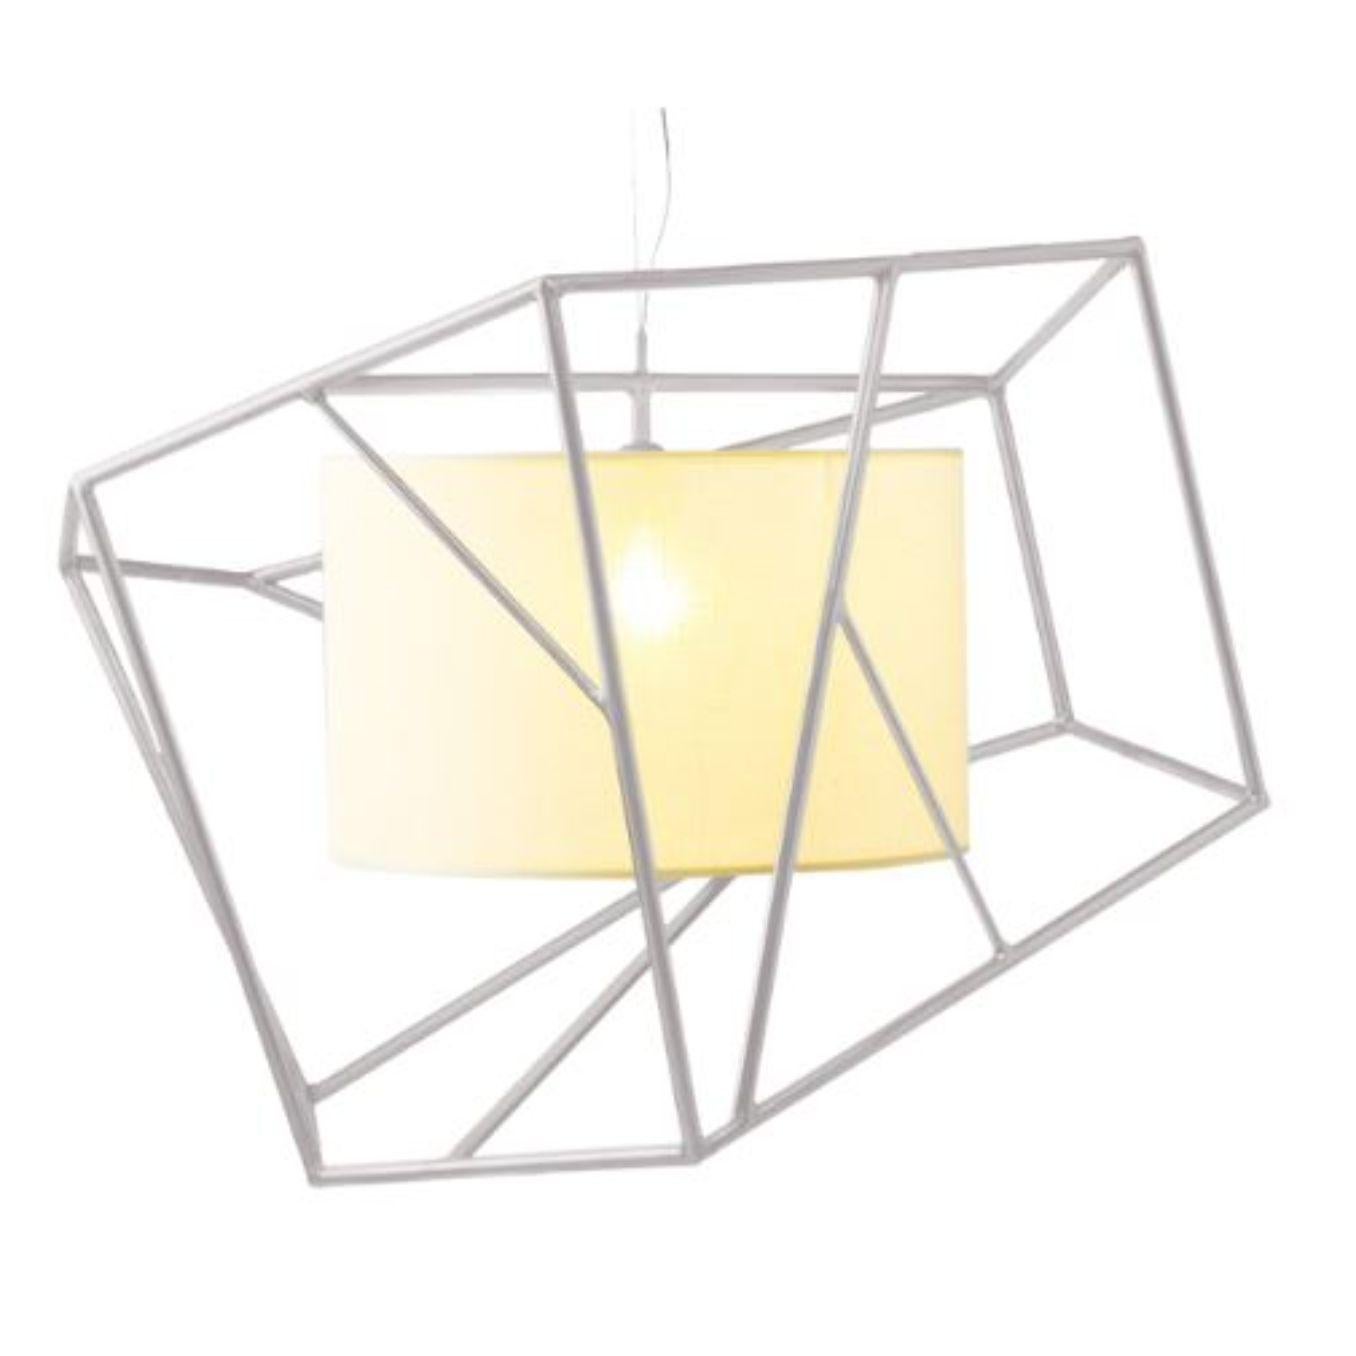 Taupe star suspension lamp by Dooq.
Dimensions: W 80 x D 80 x H 70 cm.
Materials: lacquered metal, polished or satin metal, cotton.
Also available in different colours and materials.

Information:
230V/50Hz
E27/1x20W LED
120V/60Hz
E26/1x15W